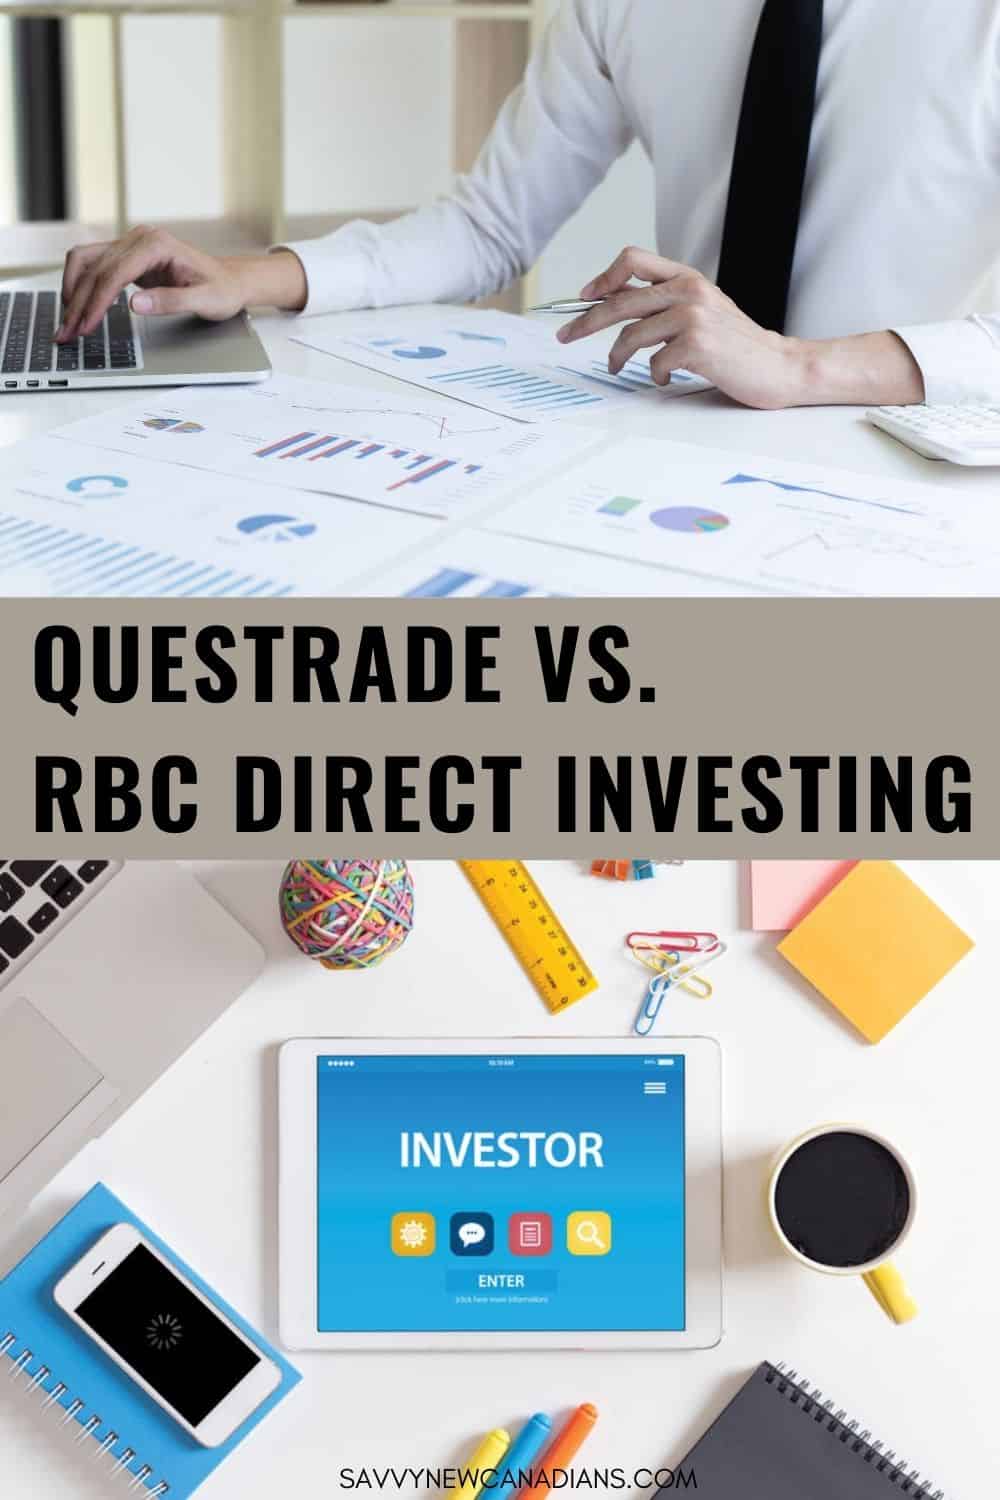 Questrade vs. RBC Direct Investing 2022: Which is Better?